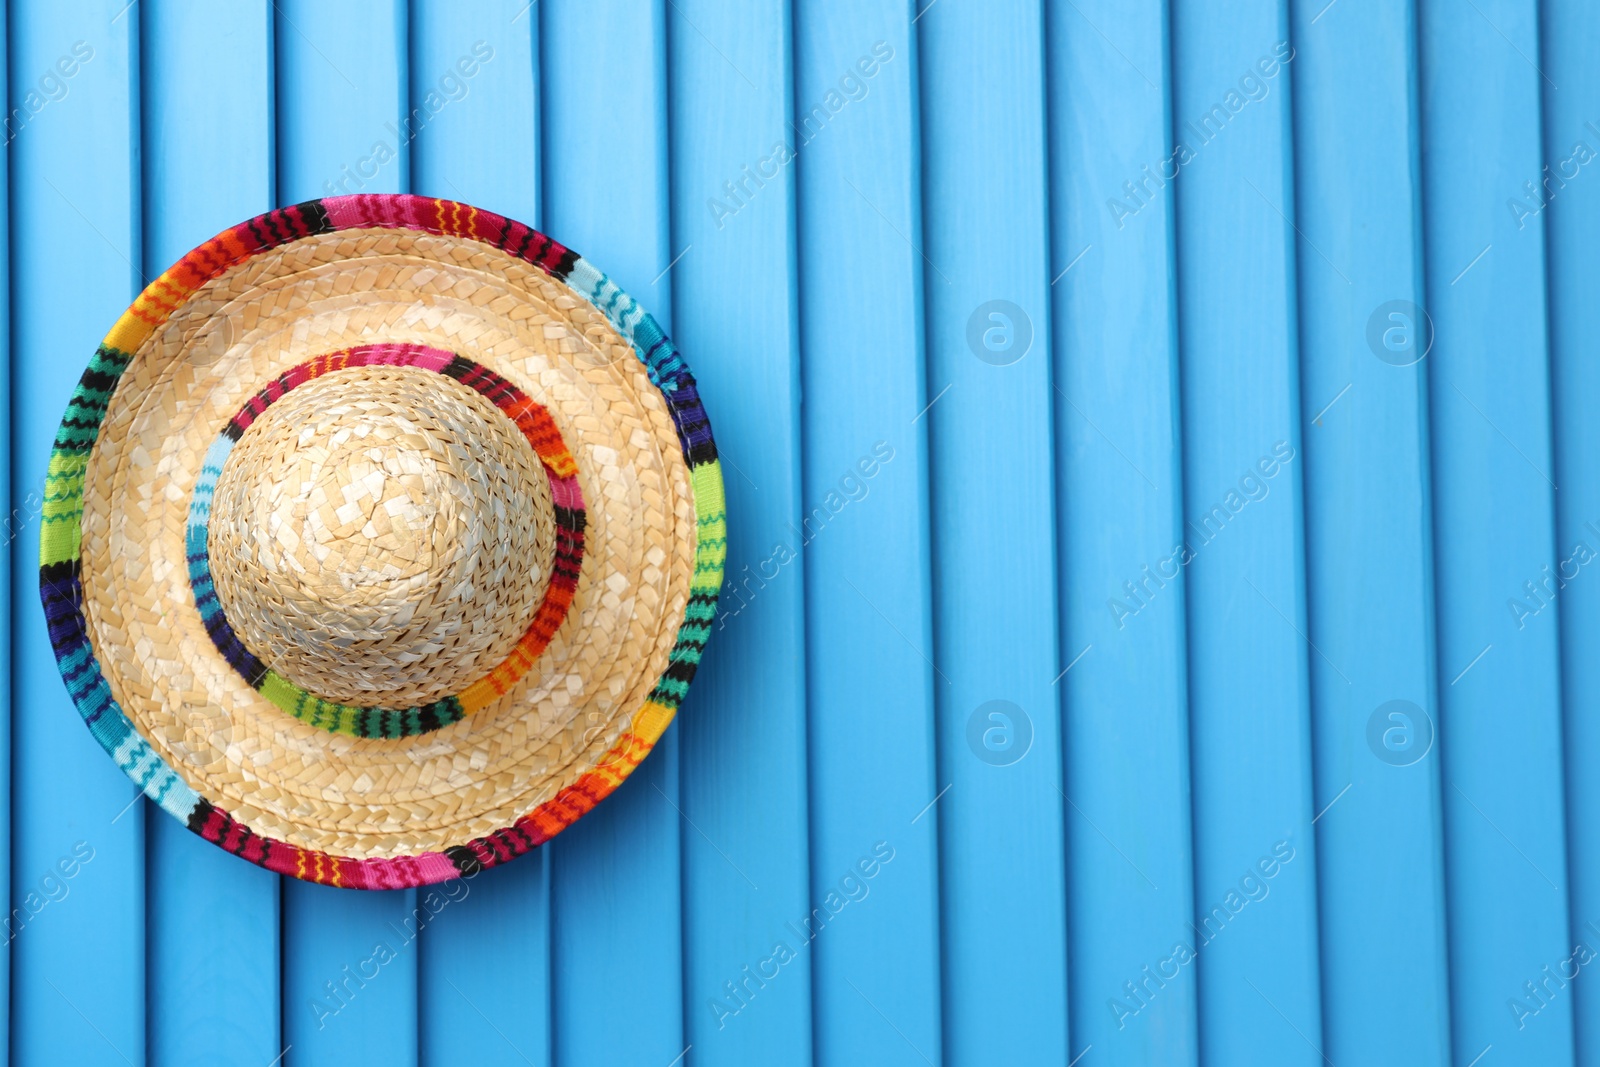 Photo of Mexican sombrero hat on blue wooden surface, top view. Space for text